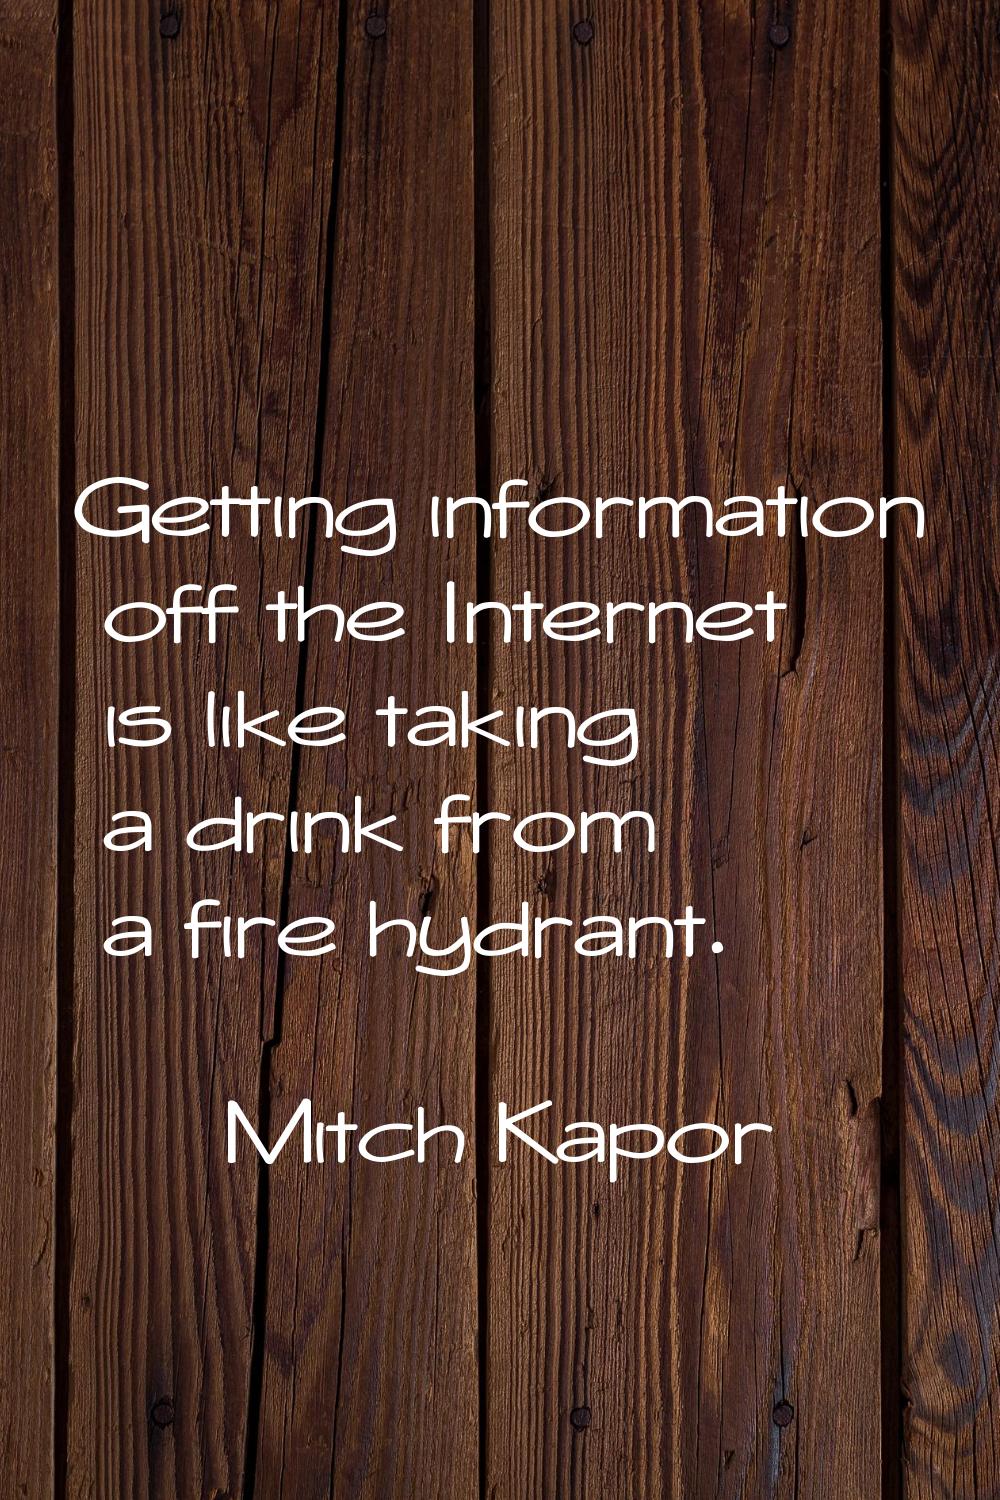 Getting information off the Internet is like taking a drink from a fire hydrant.